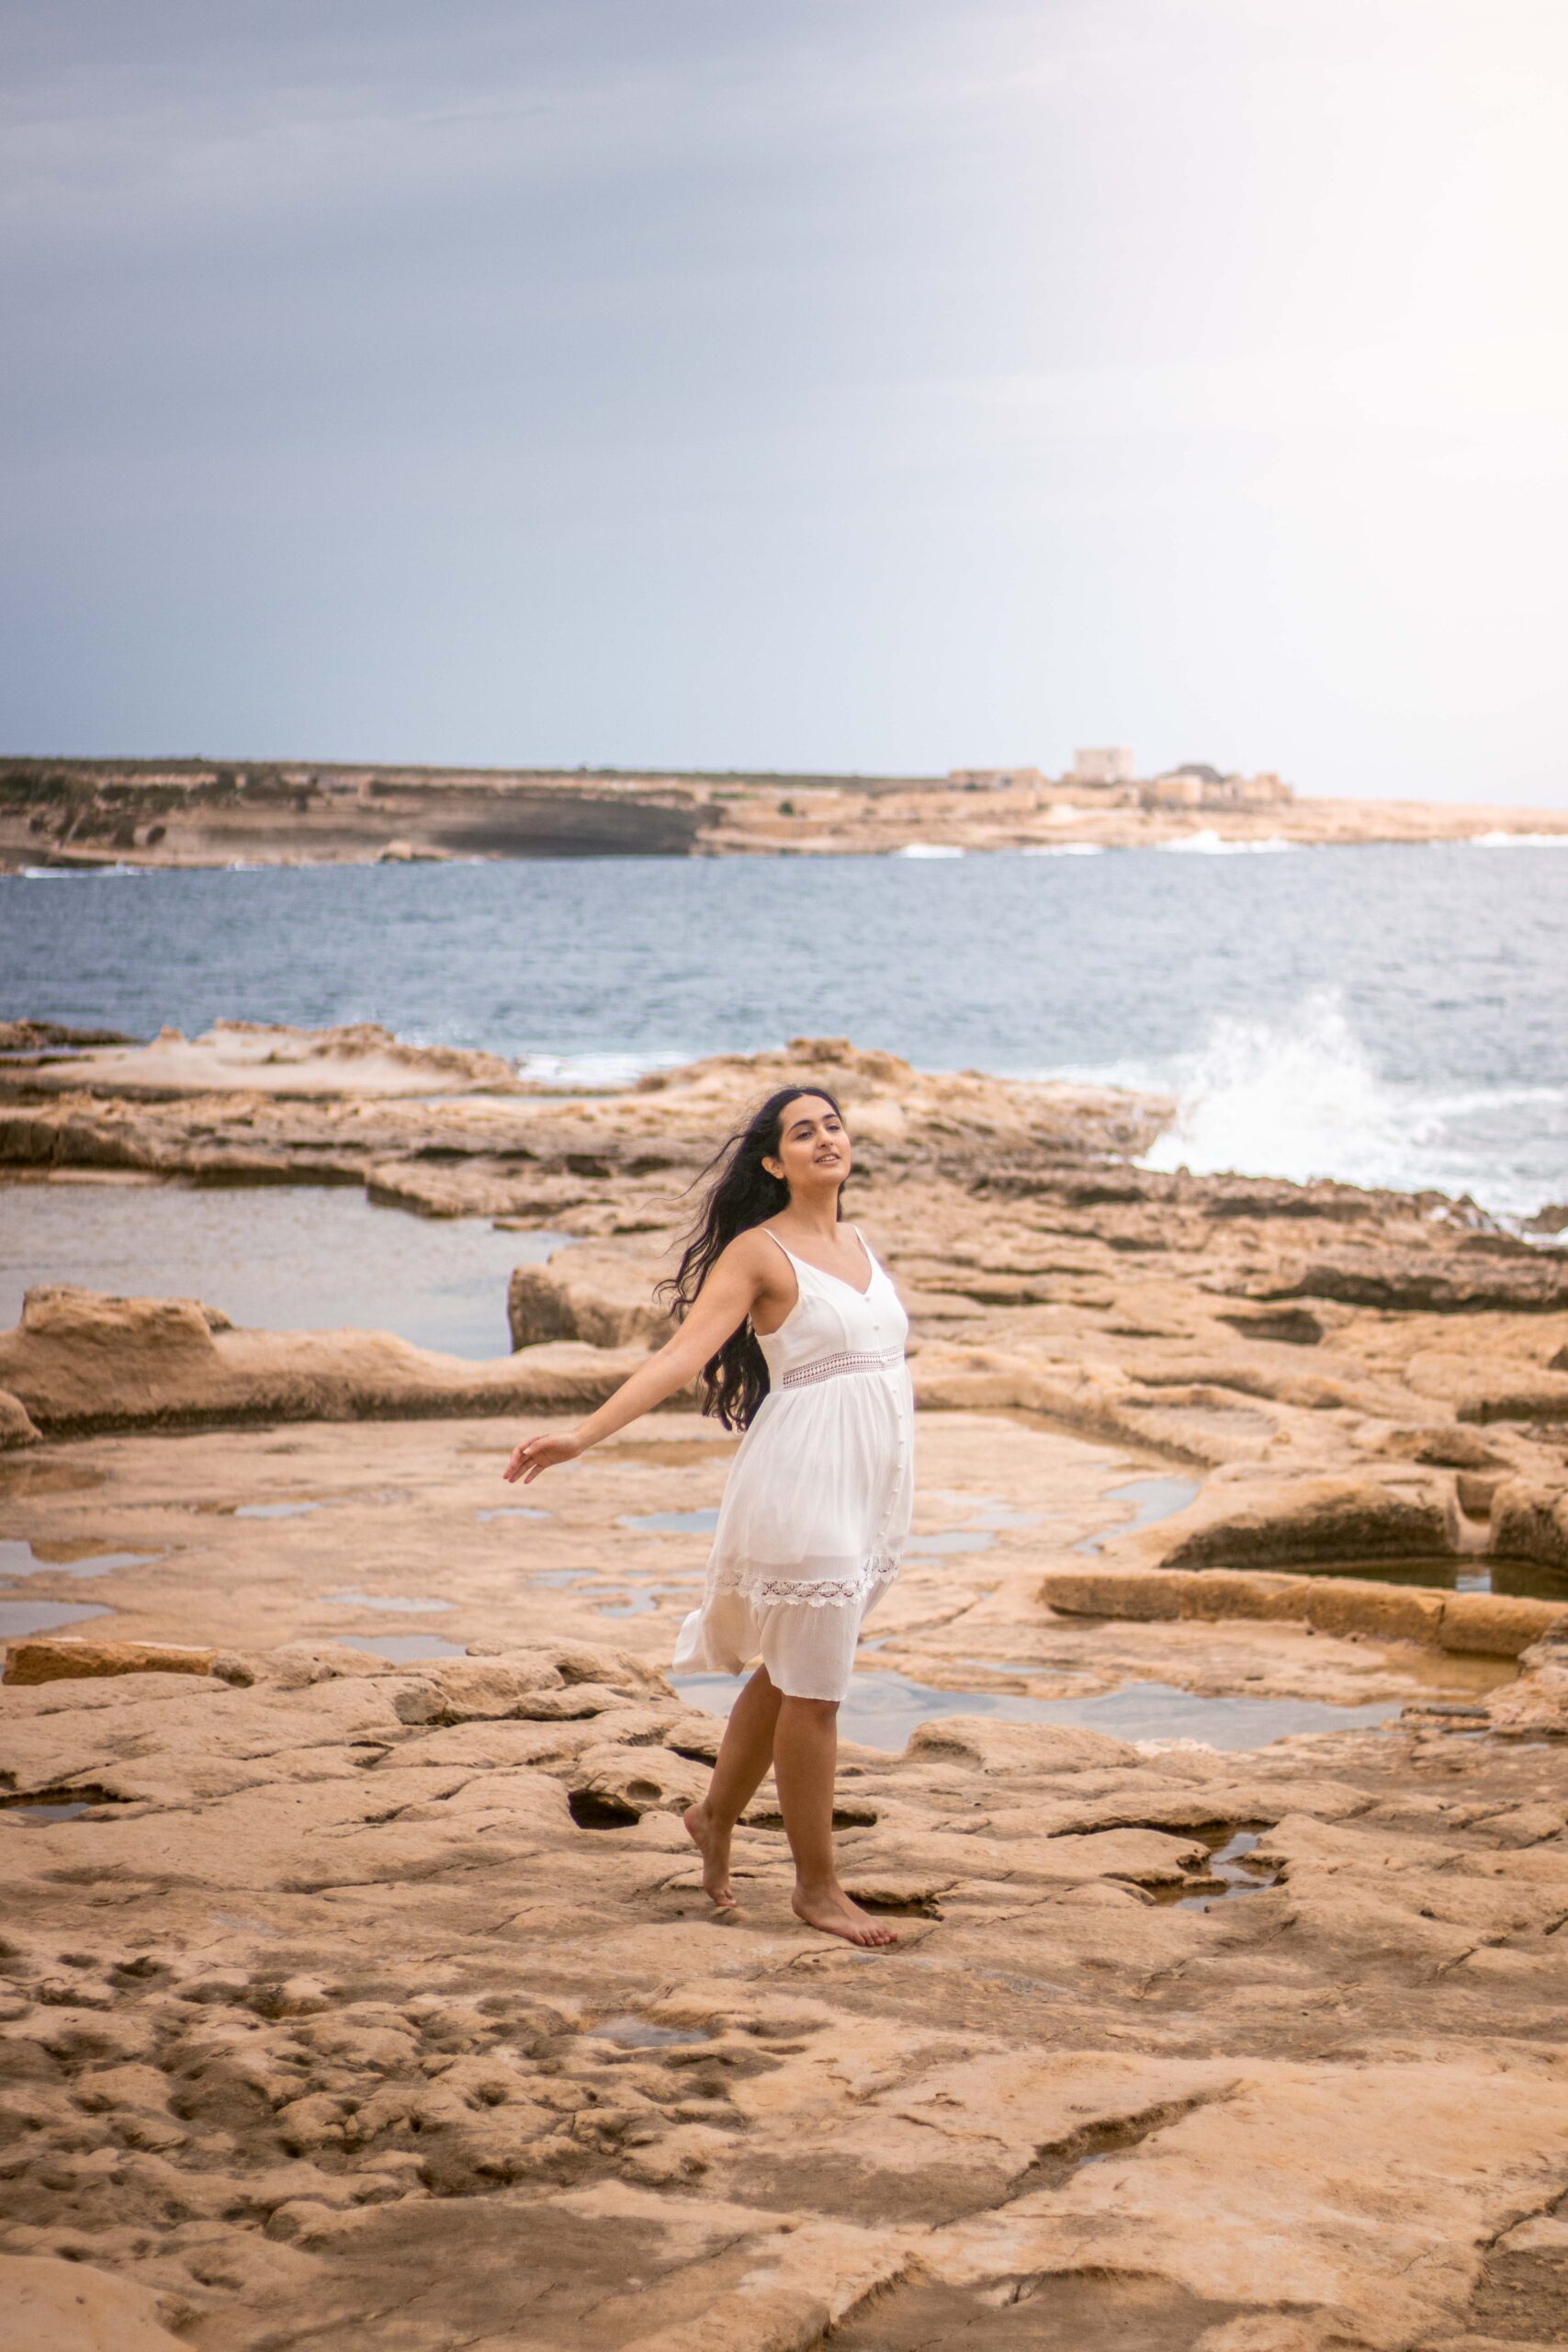 Woman wearing a white dress standing in the old salt-making pans of the Il-Qali hiking area located near Saint Peter's Pool in Malta